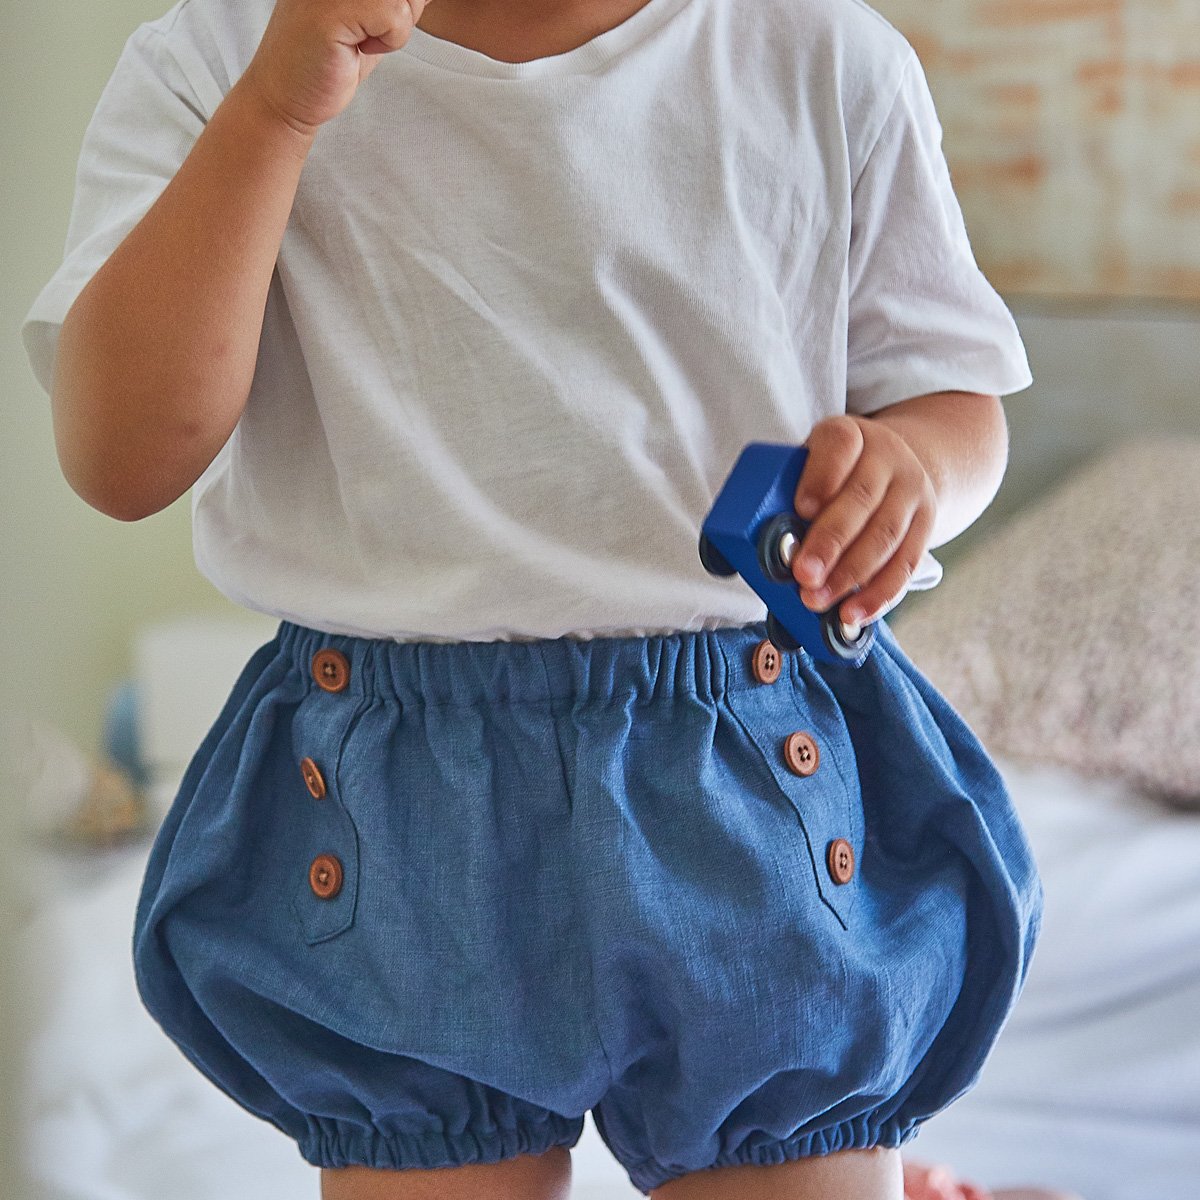 Ikatee - BILBAO Bloomers - Baby 1M/4Y - Paper Sewing Pattern